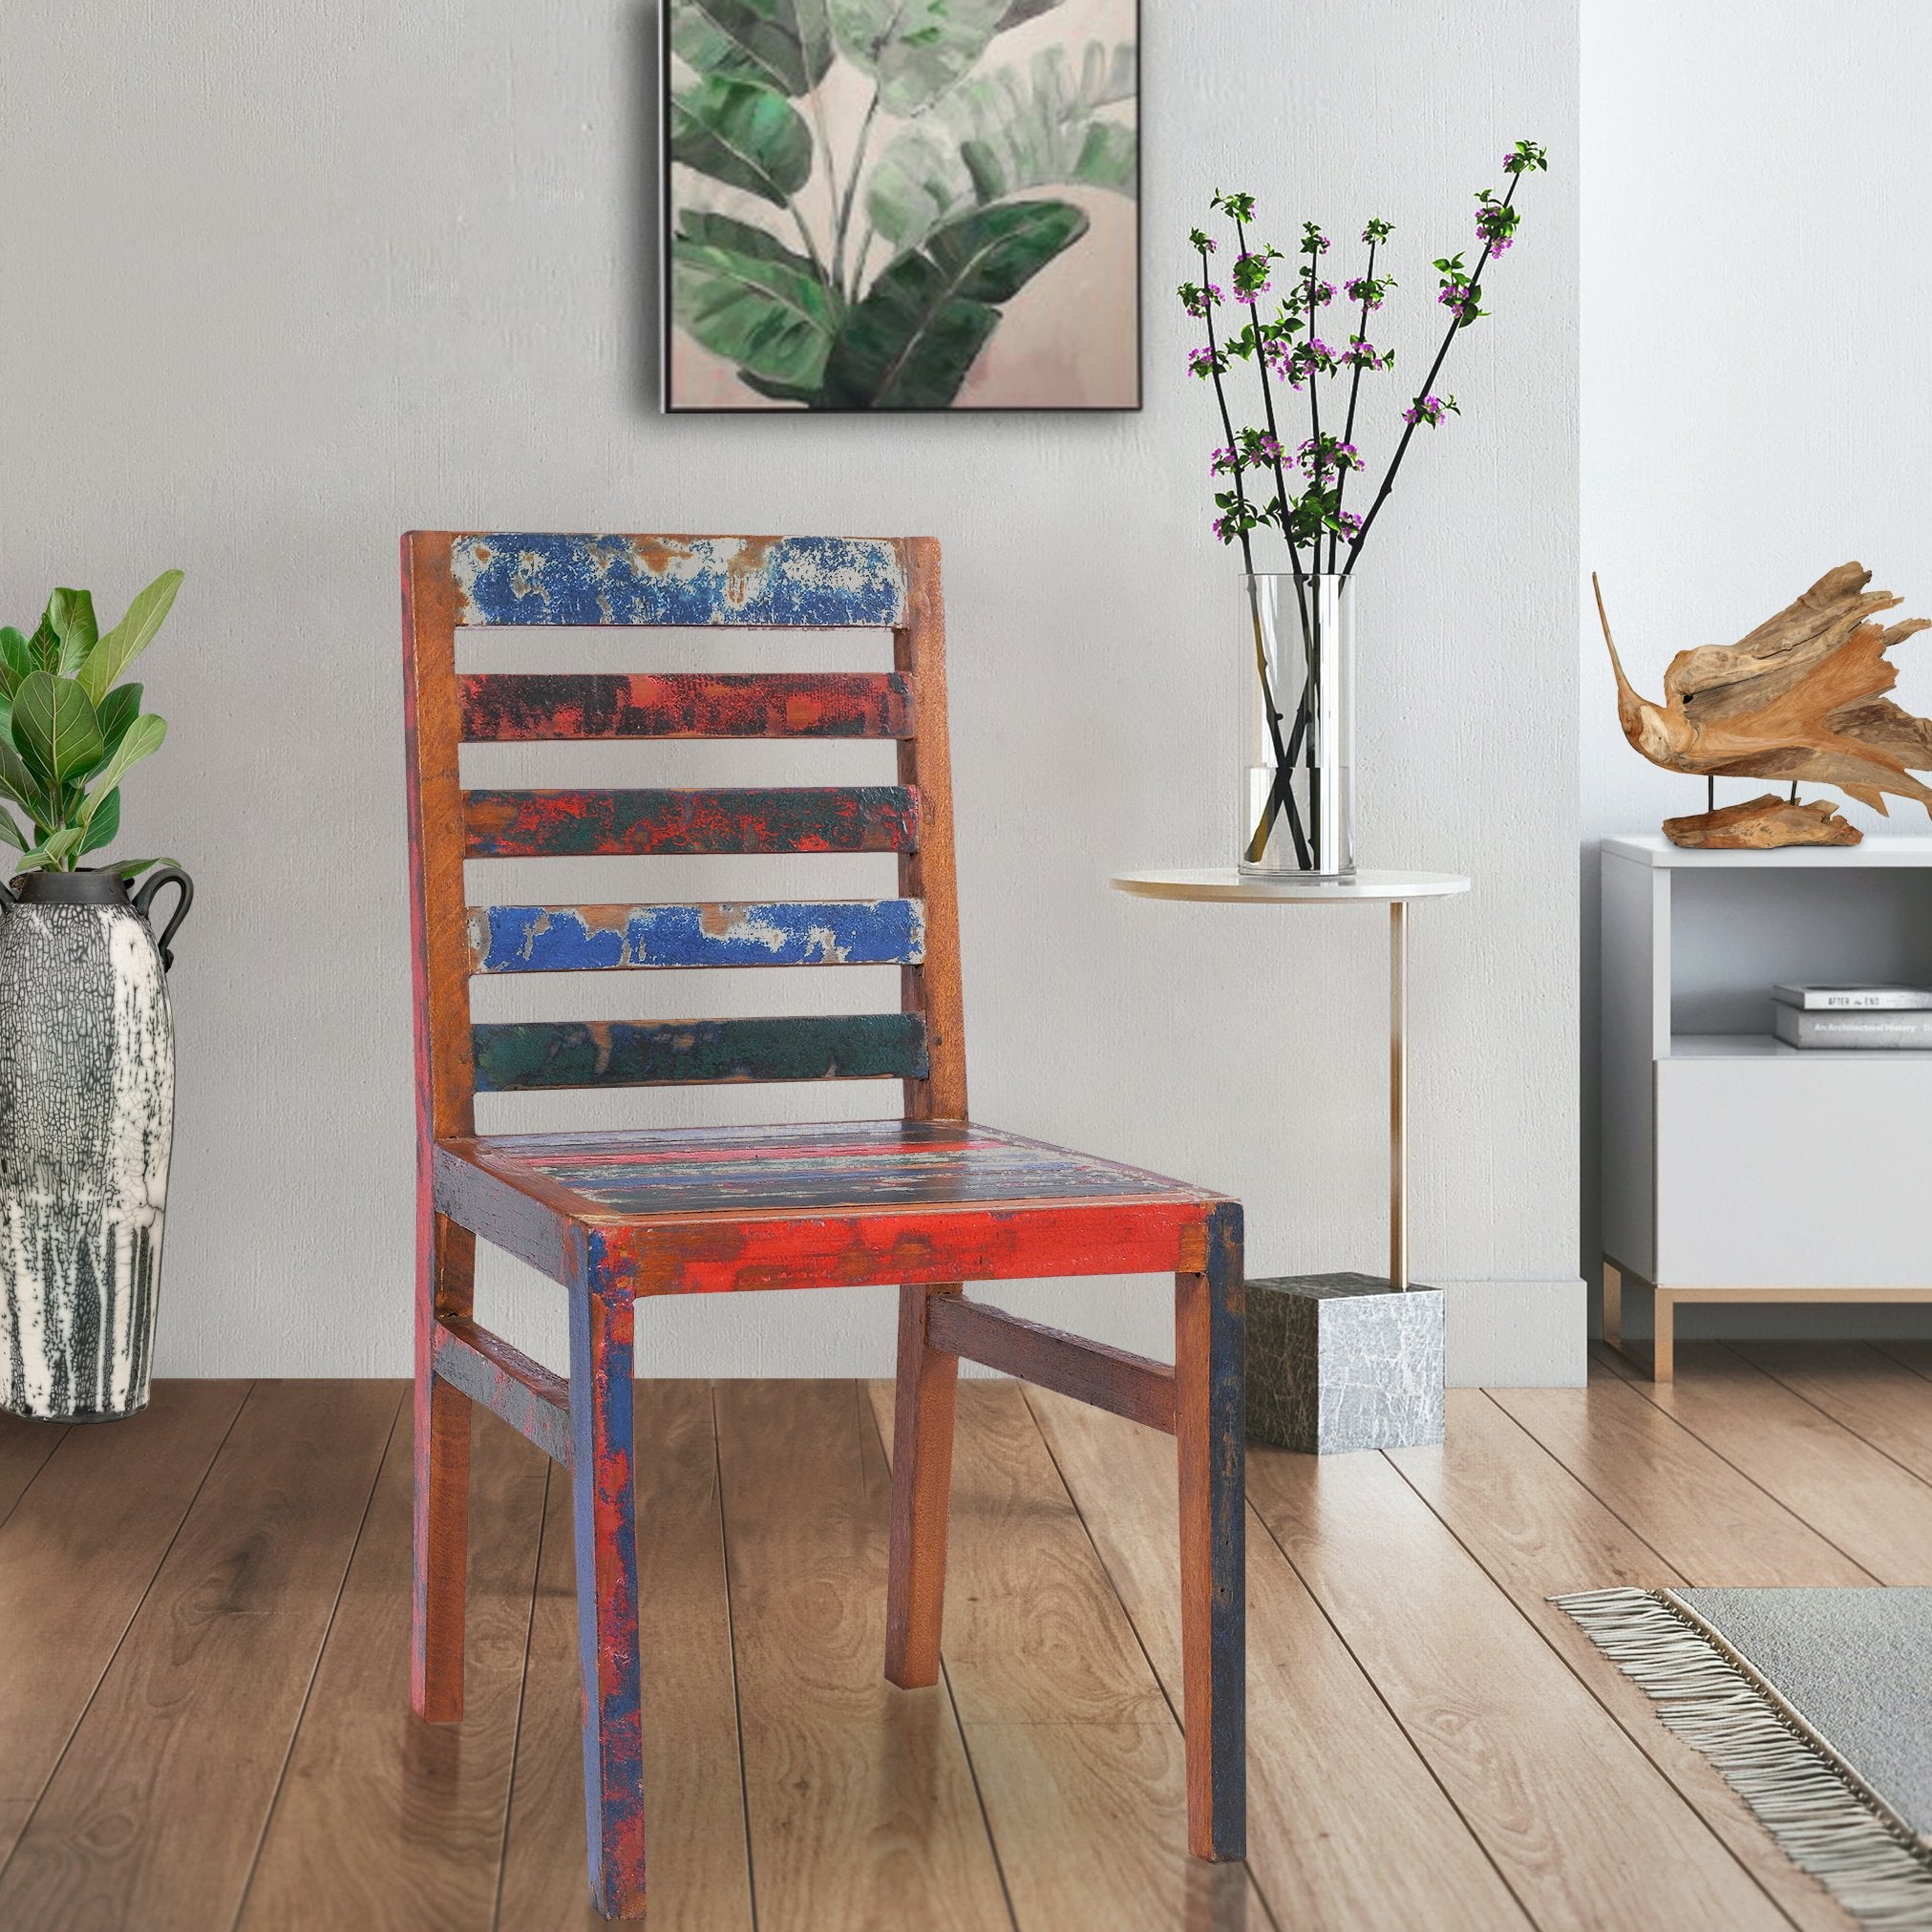 Marina Del Rey Dining Chair made from Recycled Teak Wood Boats - Chic Teak